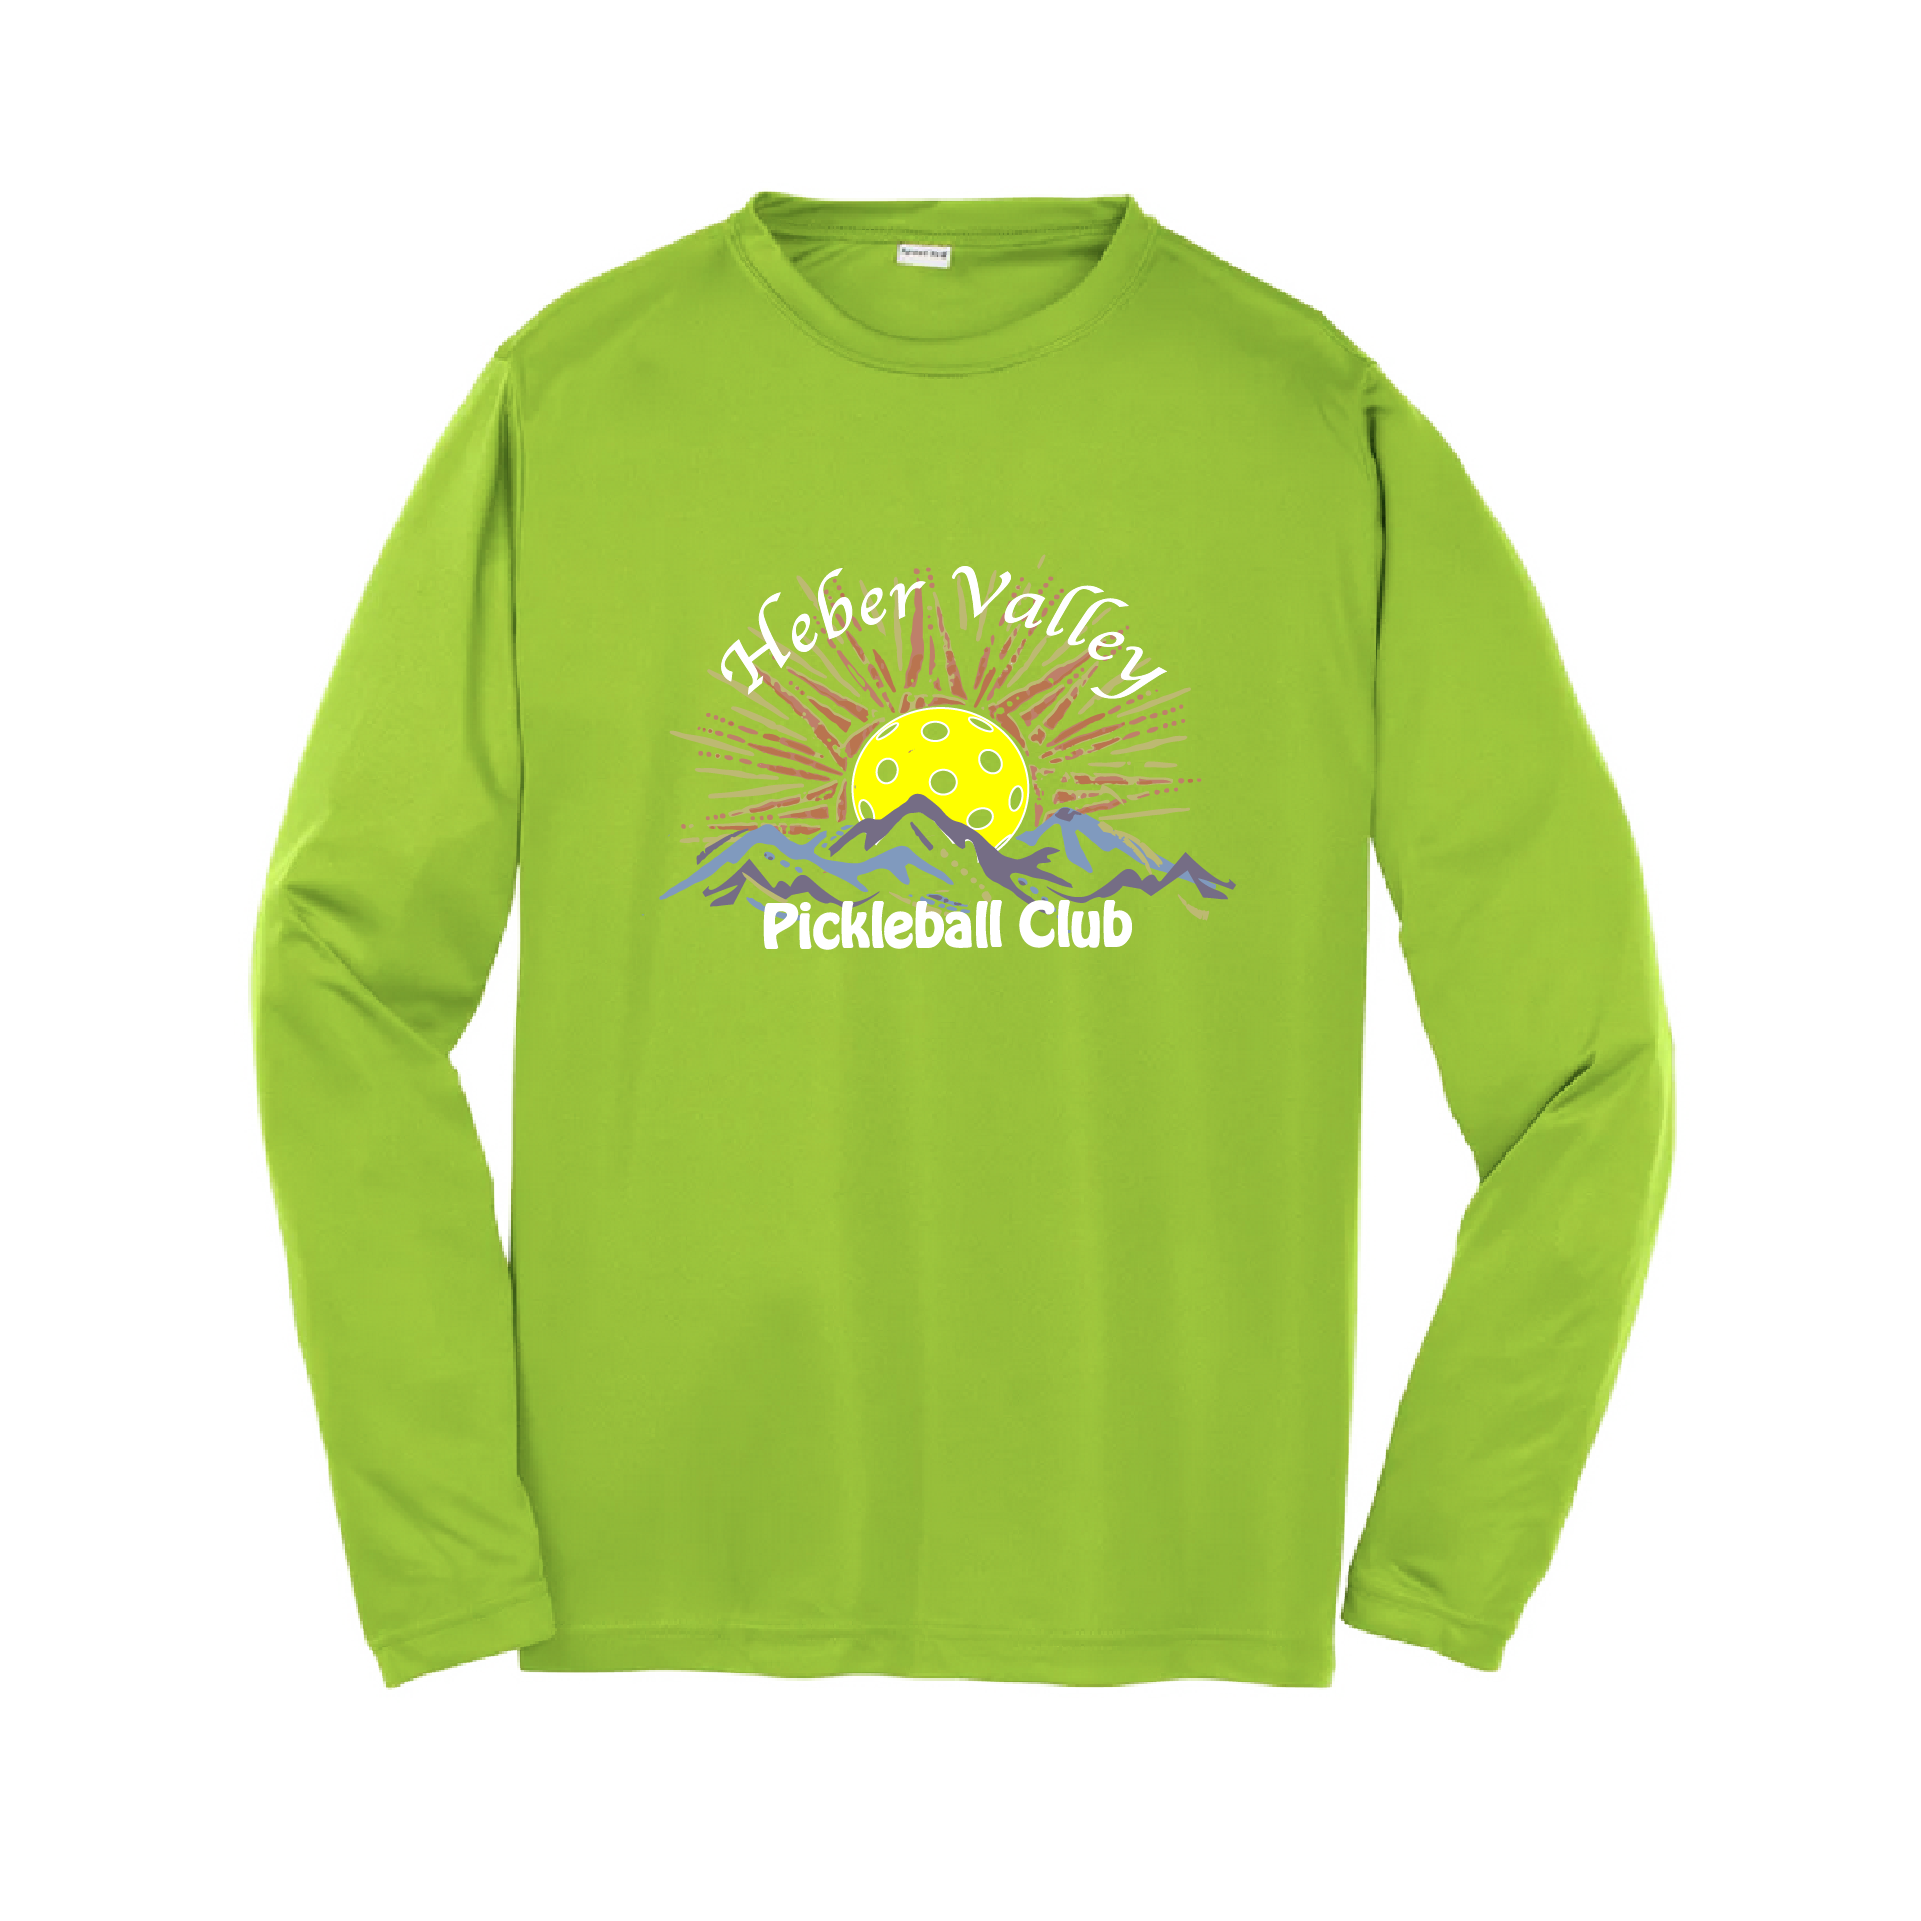 Pickleball Shirt Design: Heber Valley Pickleball Club (Full Design)  Youth Style: Long Sleeve  Shirts are lightweight, roomy and highly breathable. These moisture-wicking shirts are designed for athletic performance. They feature PosiCharge technology to lock in color and prevent logos from fading. Removable tag and set-in sleeves for comfort.